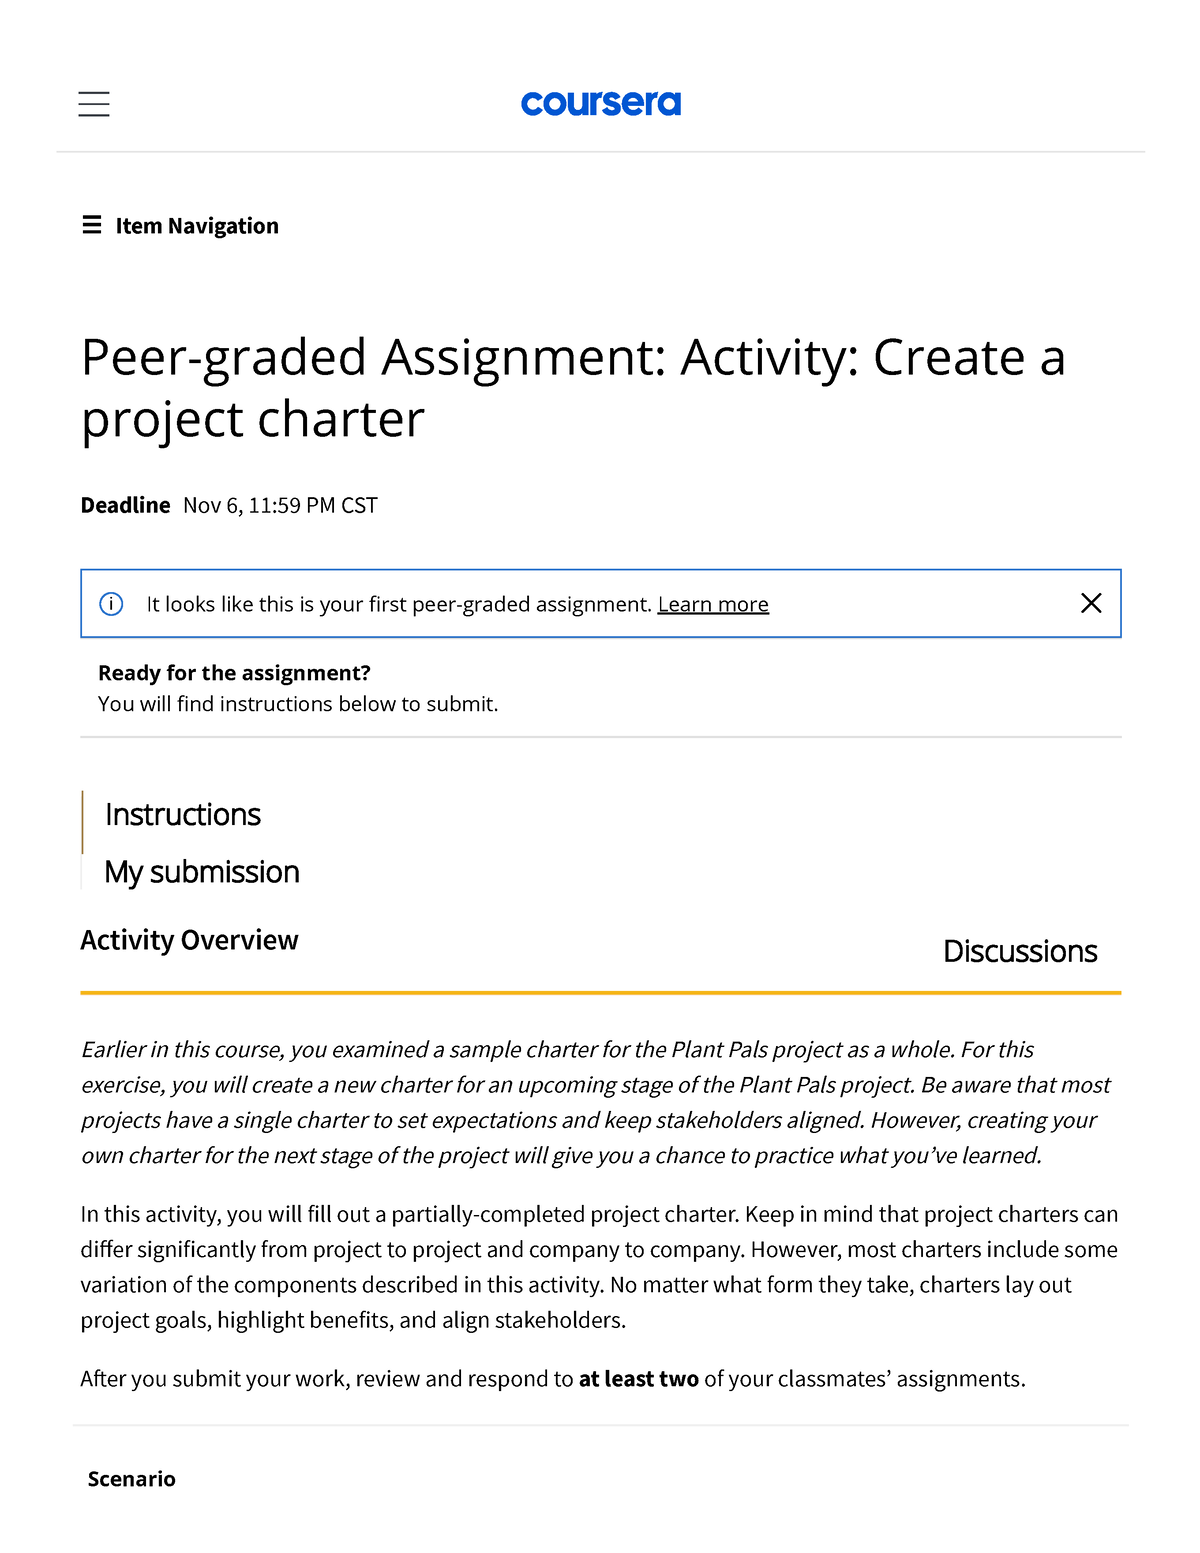 coursera peer graded assignment not reviewed